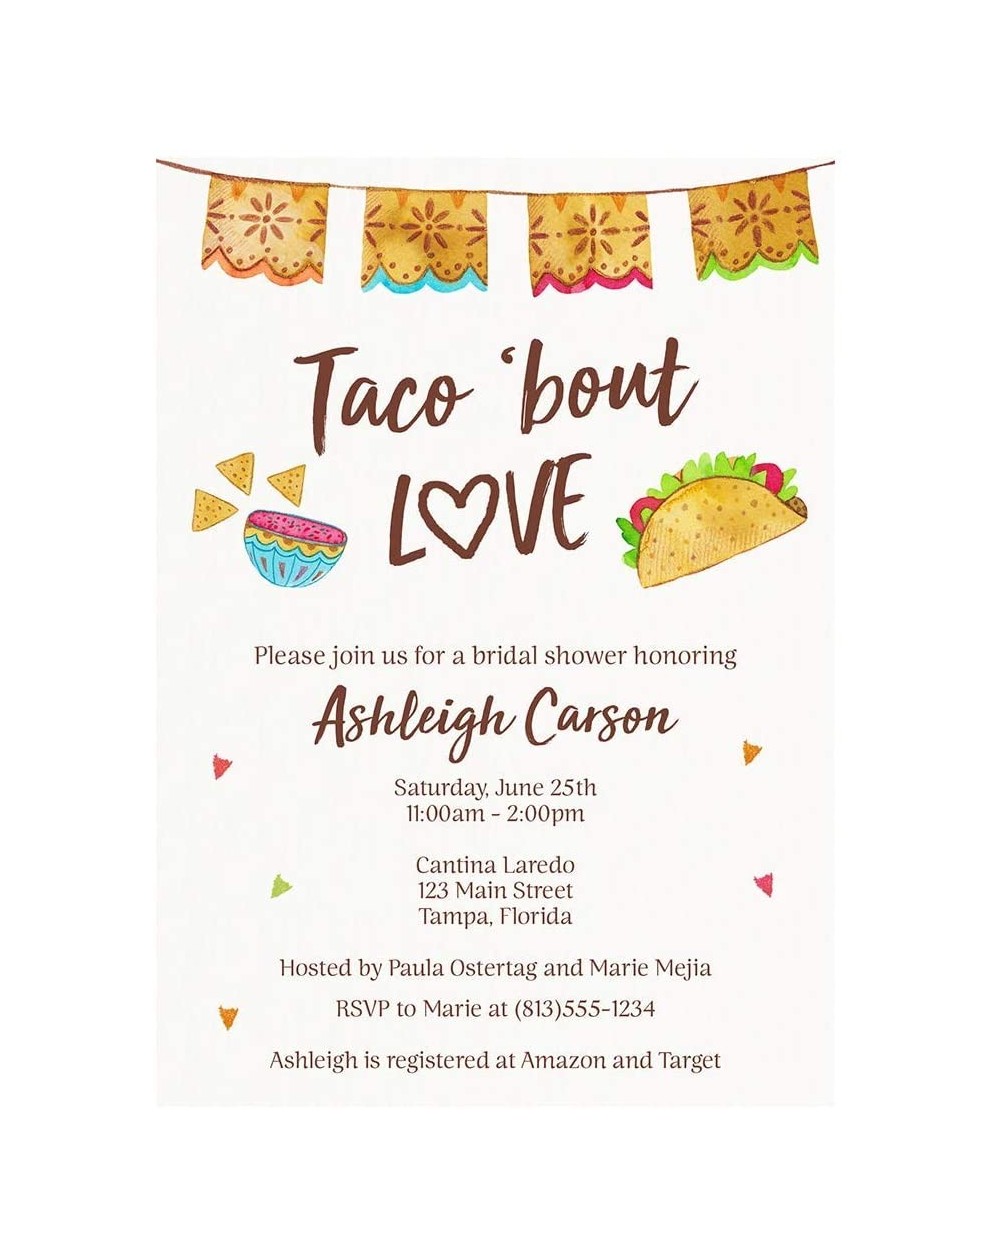 Invitations Taco Bridal Shower Invitations Fiesta Wedding Invite Taco Bout 'Bout Love Customizable Printed Personalized Cards...